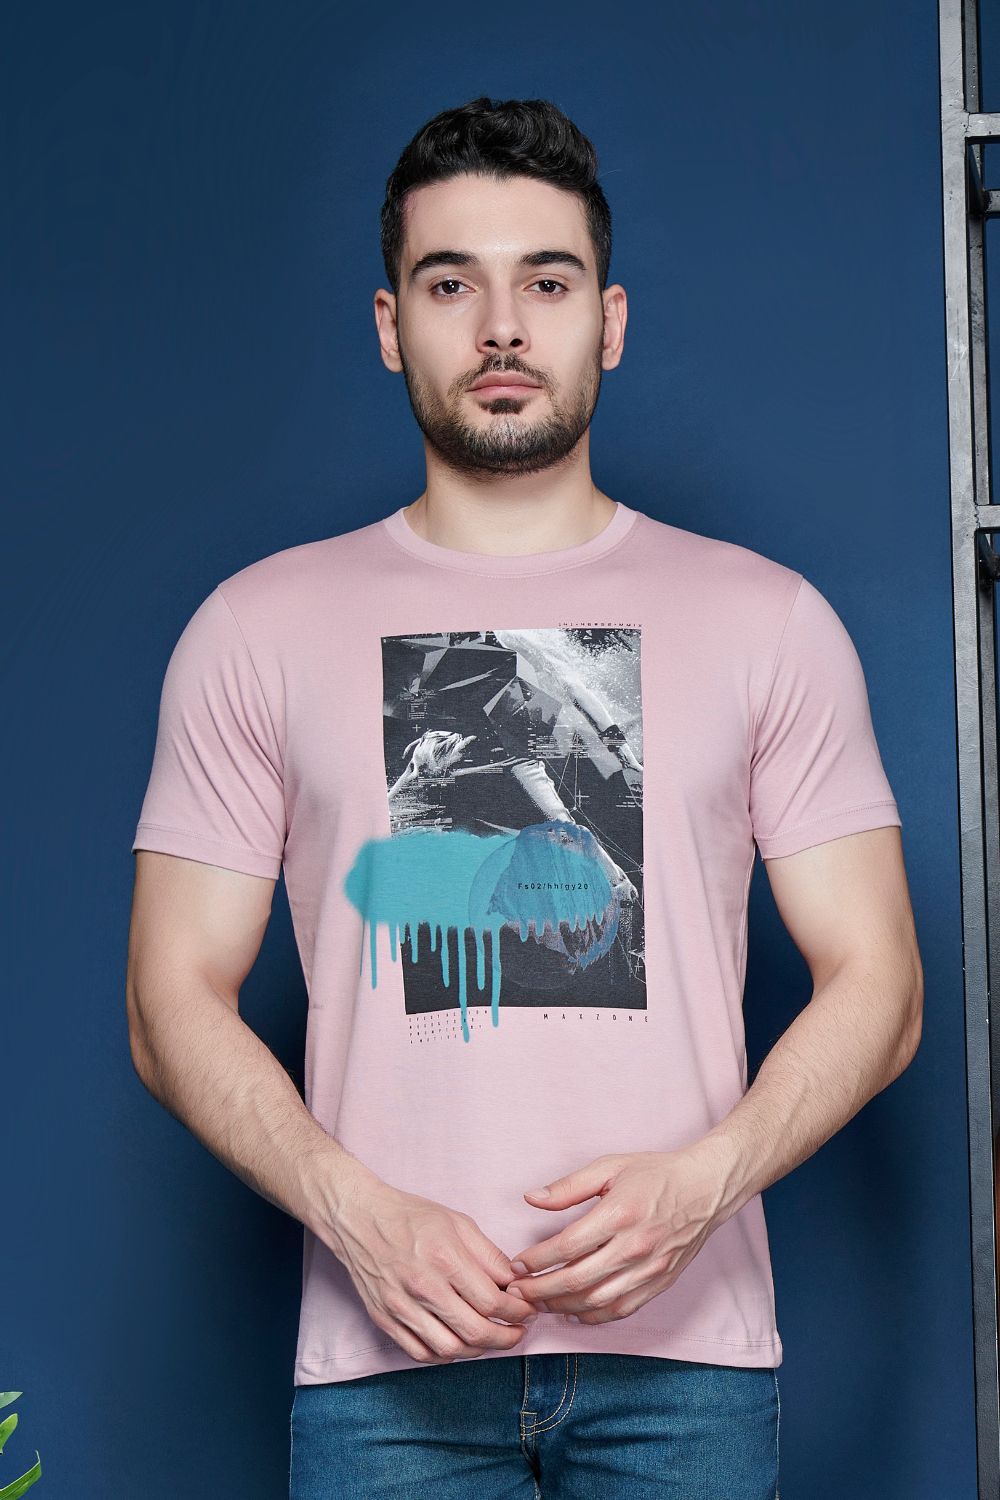 Cotton Graphic T shirt for men in the color lilac shade with half sleeves and round neck, front view.